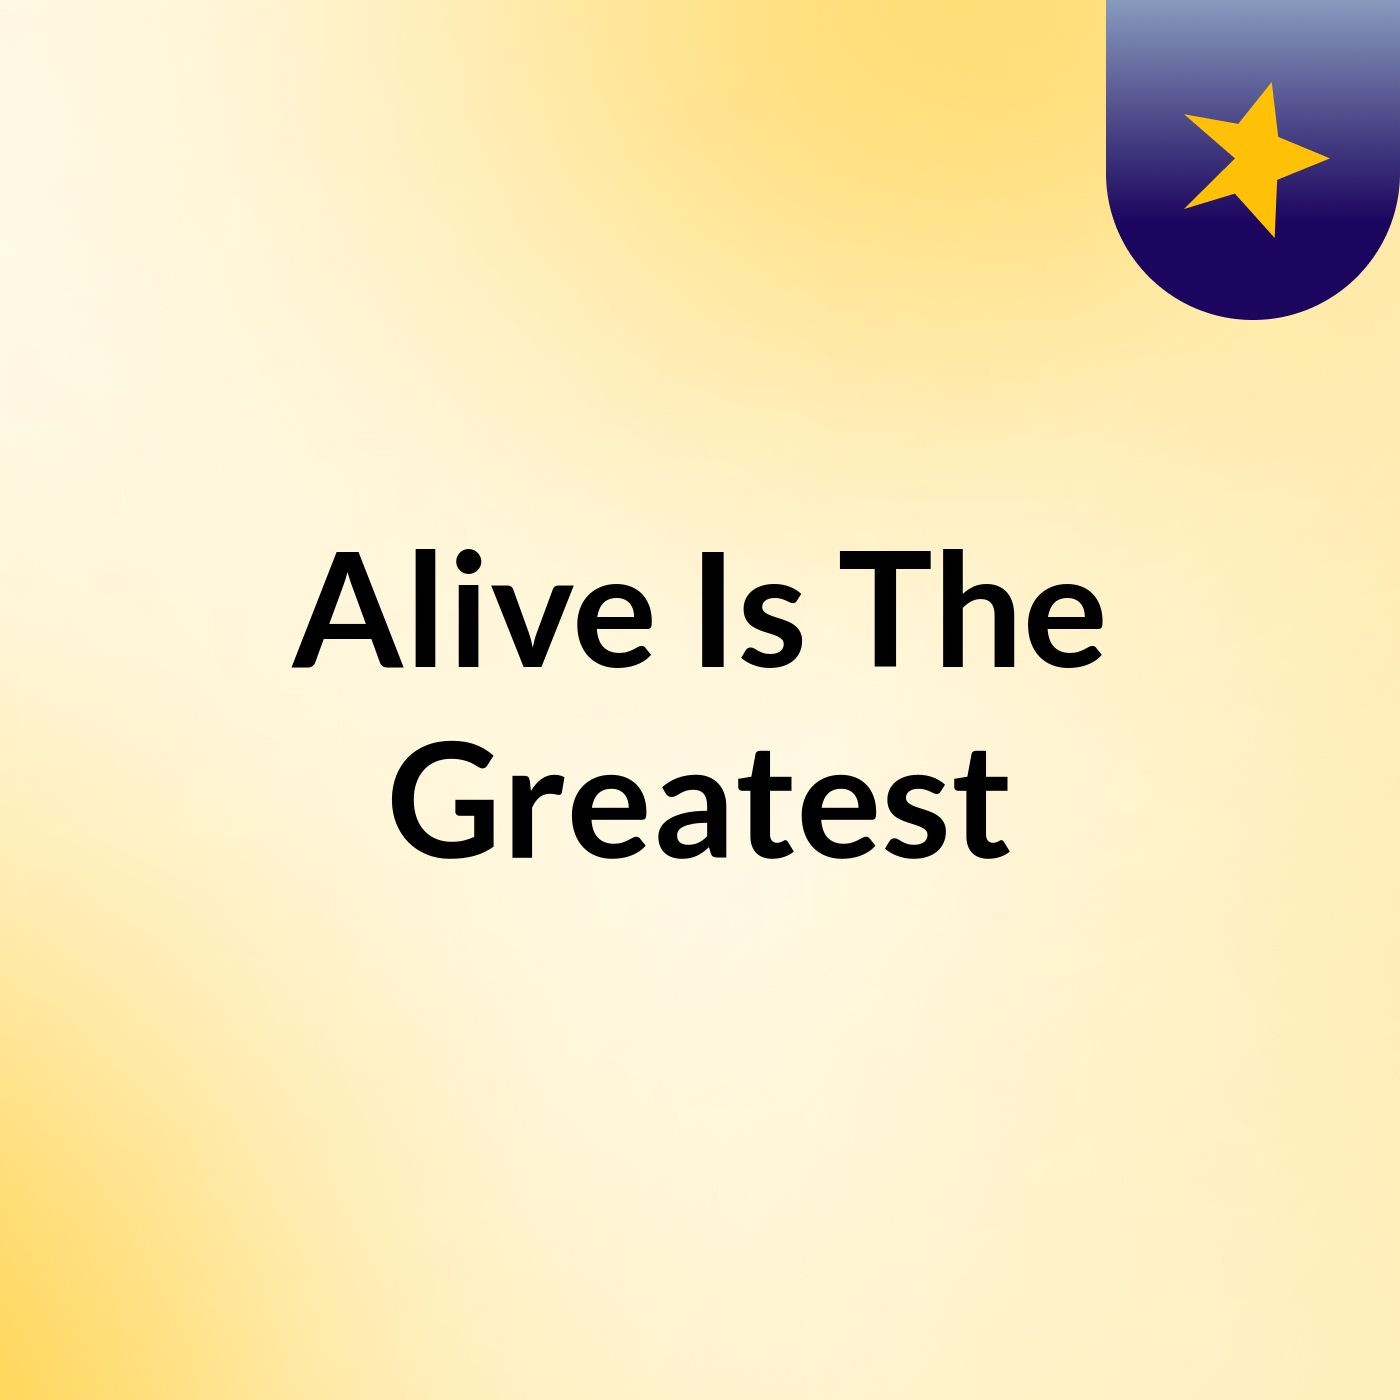 Episode 8 - Alive Is The Greatest